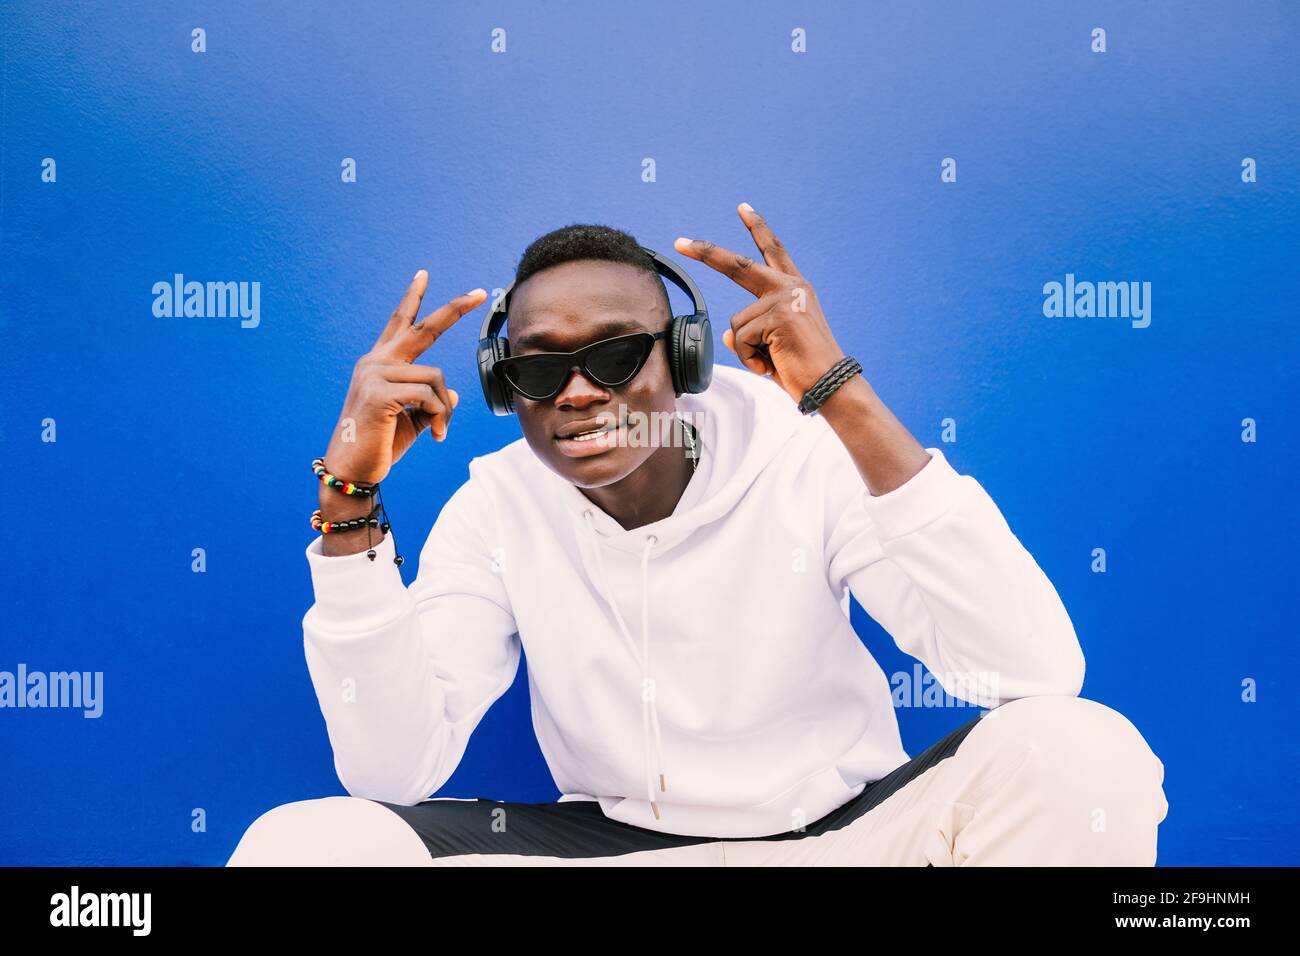 Young african black man seated against a blue wall looking at camera wearing a white sweatshirt and sunglasses doing the victory sign Stock Photo